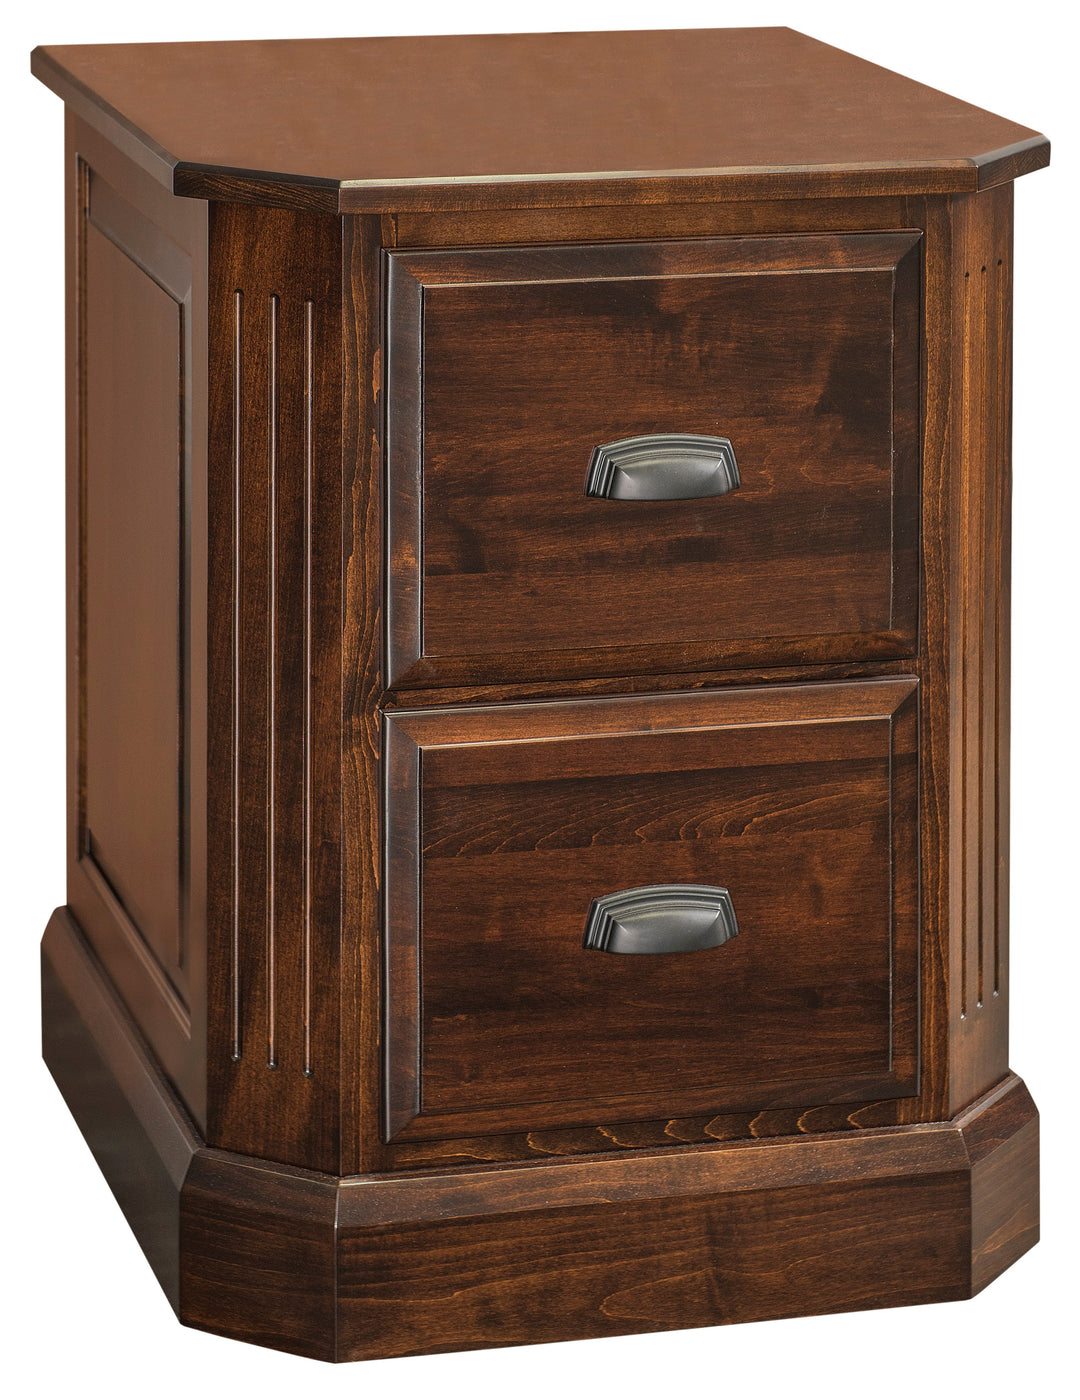 QW Amish Classic Saturn File Cabinet - Choose your Height